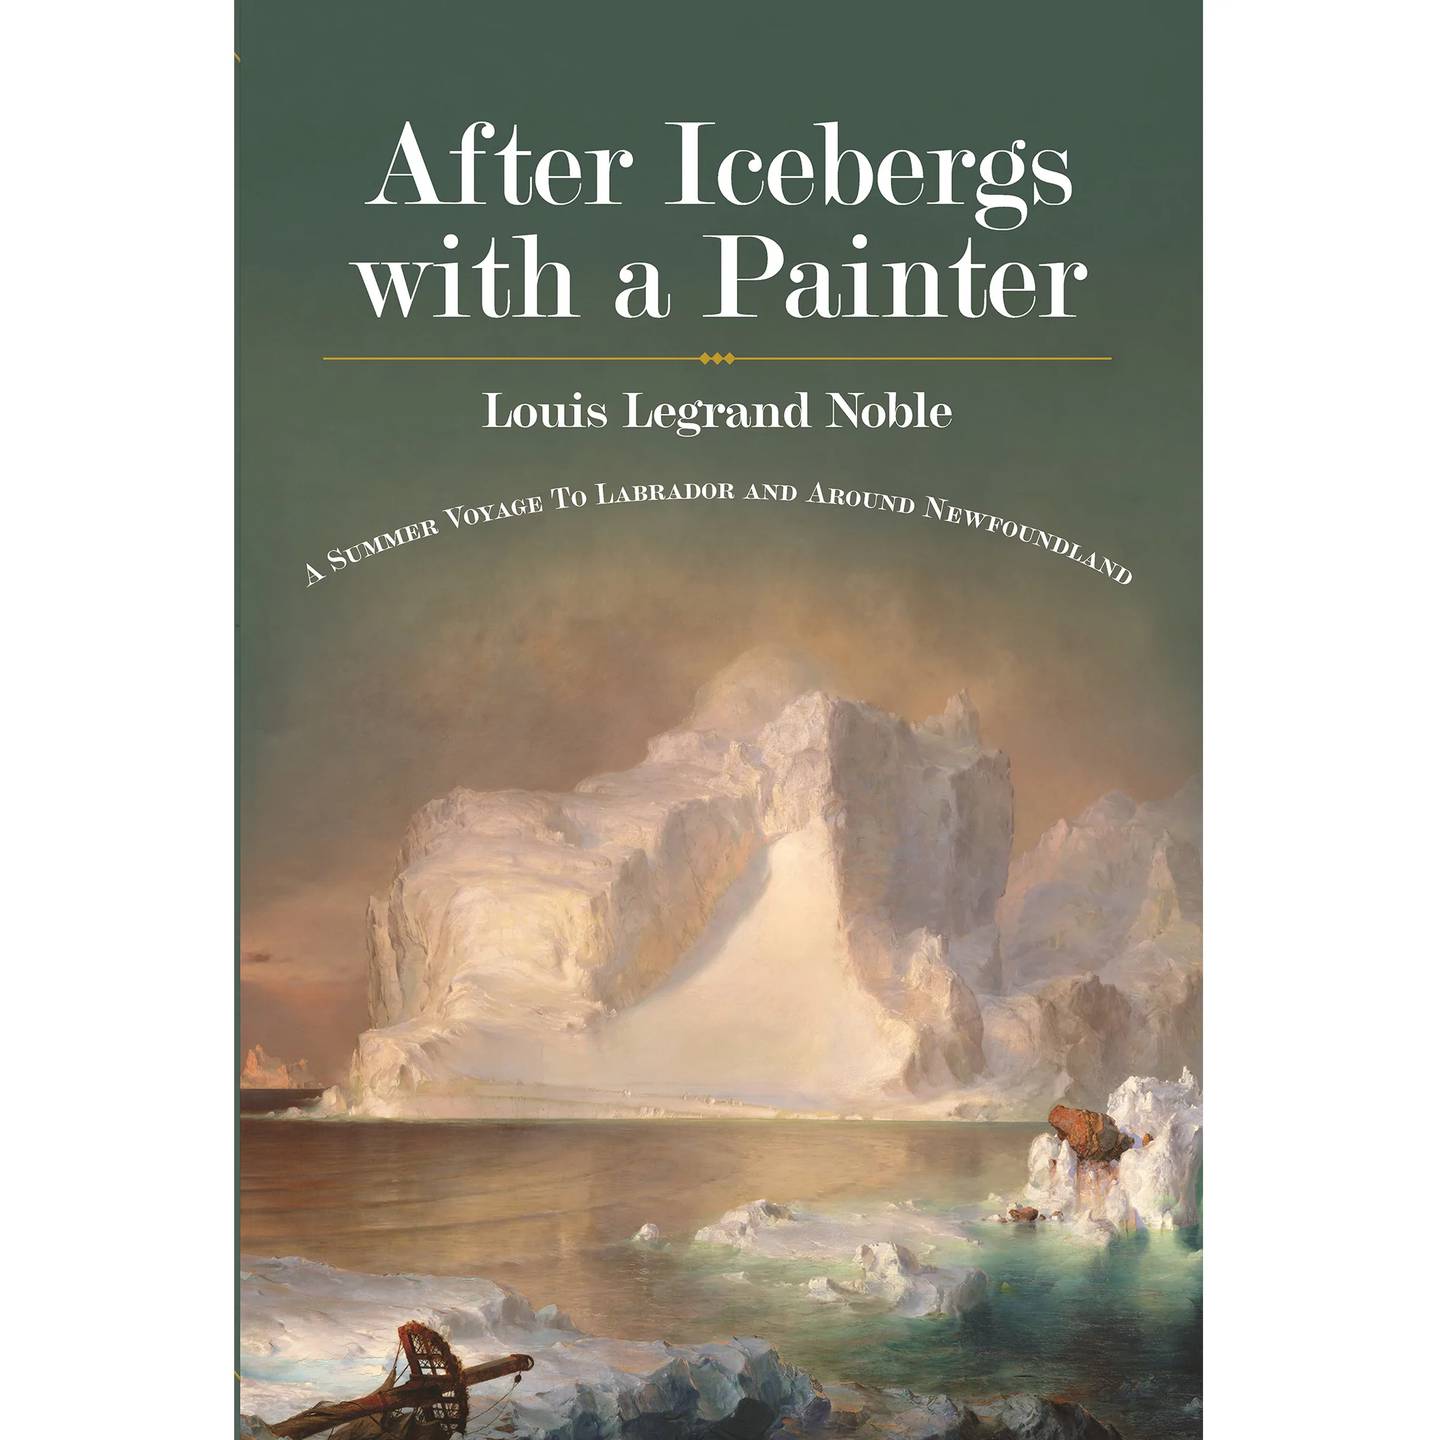 “After Icebergs with a Painter: A Summer Voyage to Labrador and Around Newfoundland” by Louis Legrand Noble